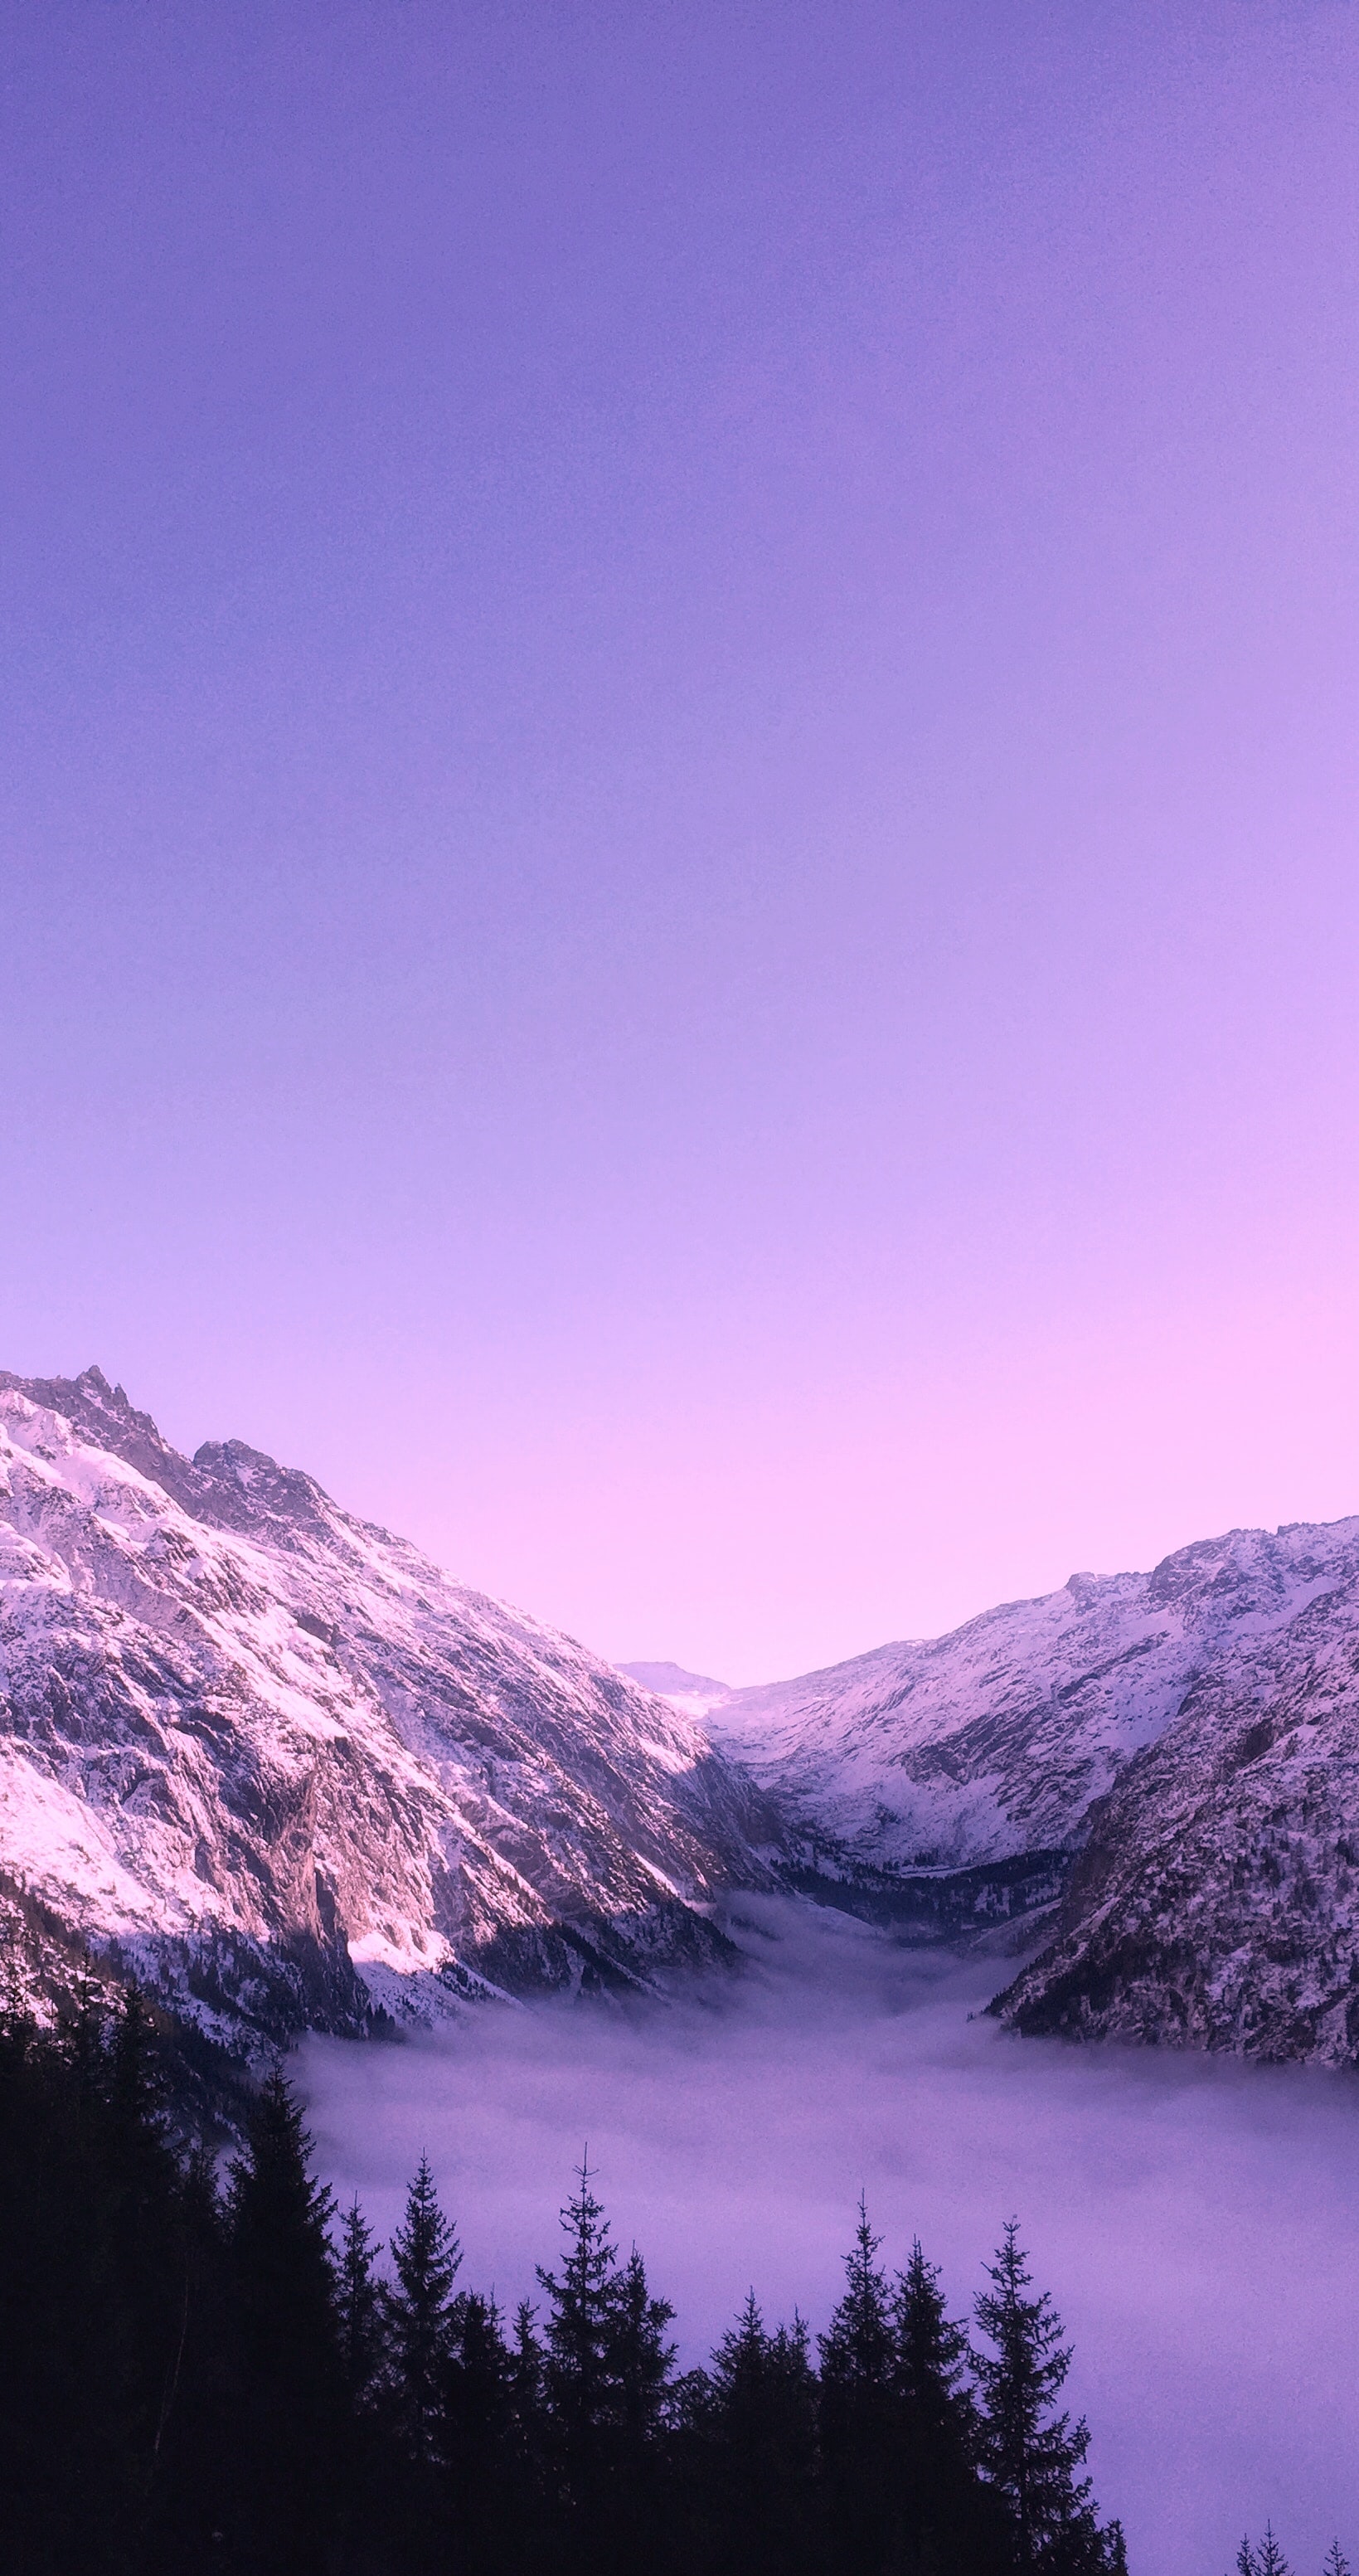 A purple and blue sunset over a snow-covered mountain - Purple, light purple, winter, clean, dark purple, landscape, cute purple, lavender, mountain, pastel purple, violet